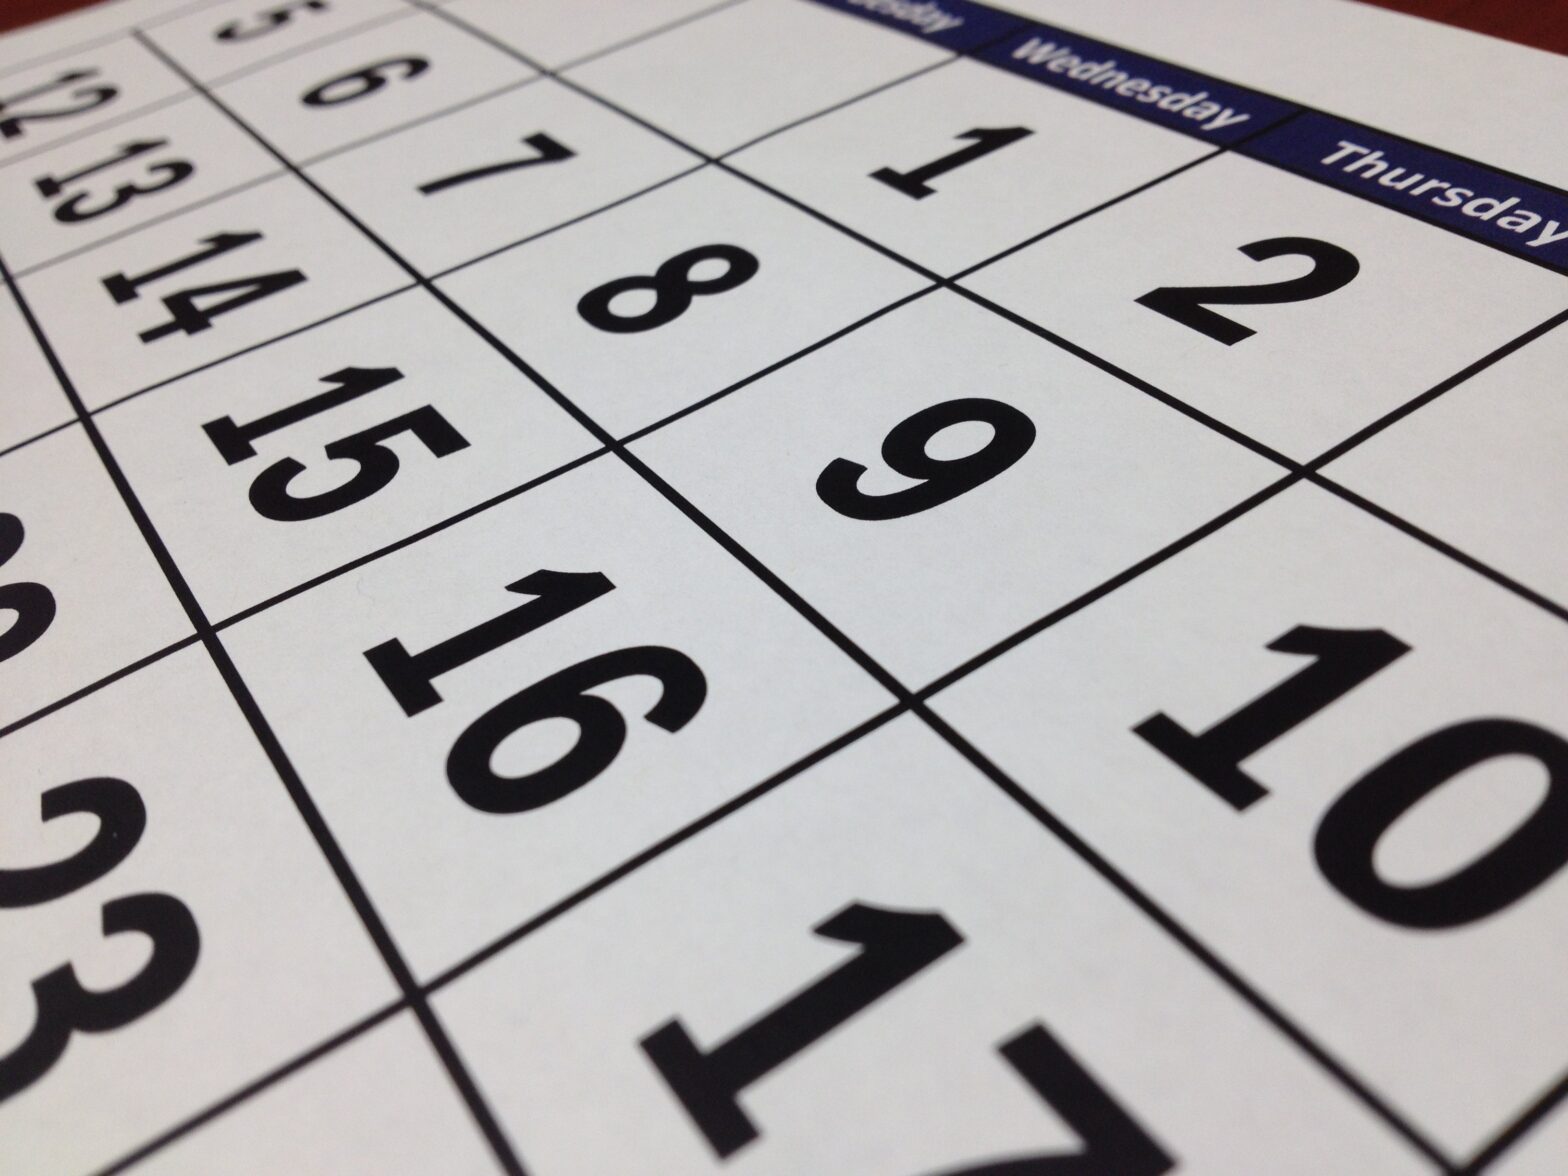 If you pursue a personal injury claim, check your calendar to be aware of your Statute of Limitations.